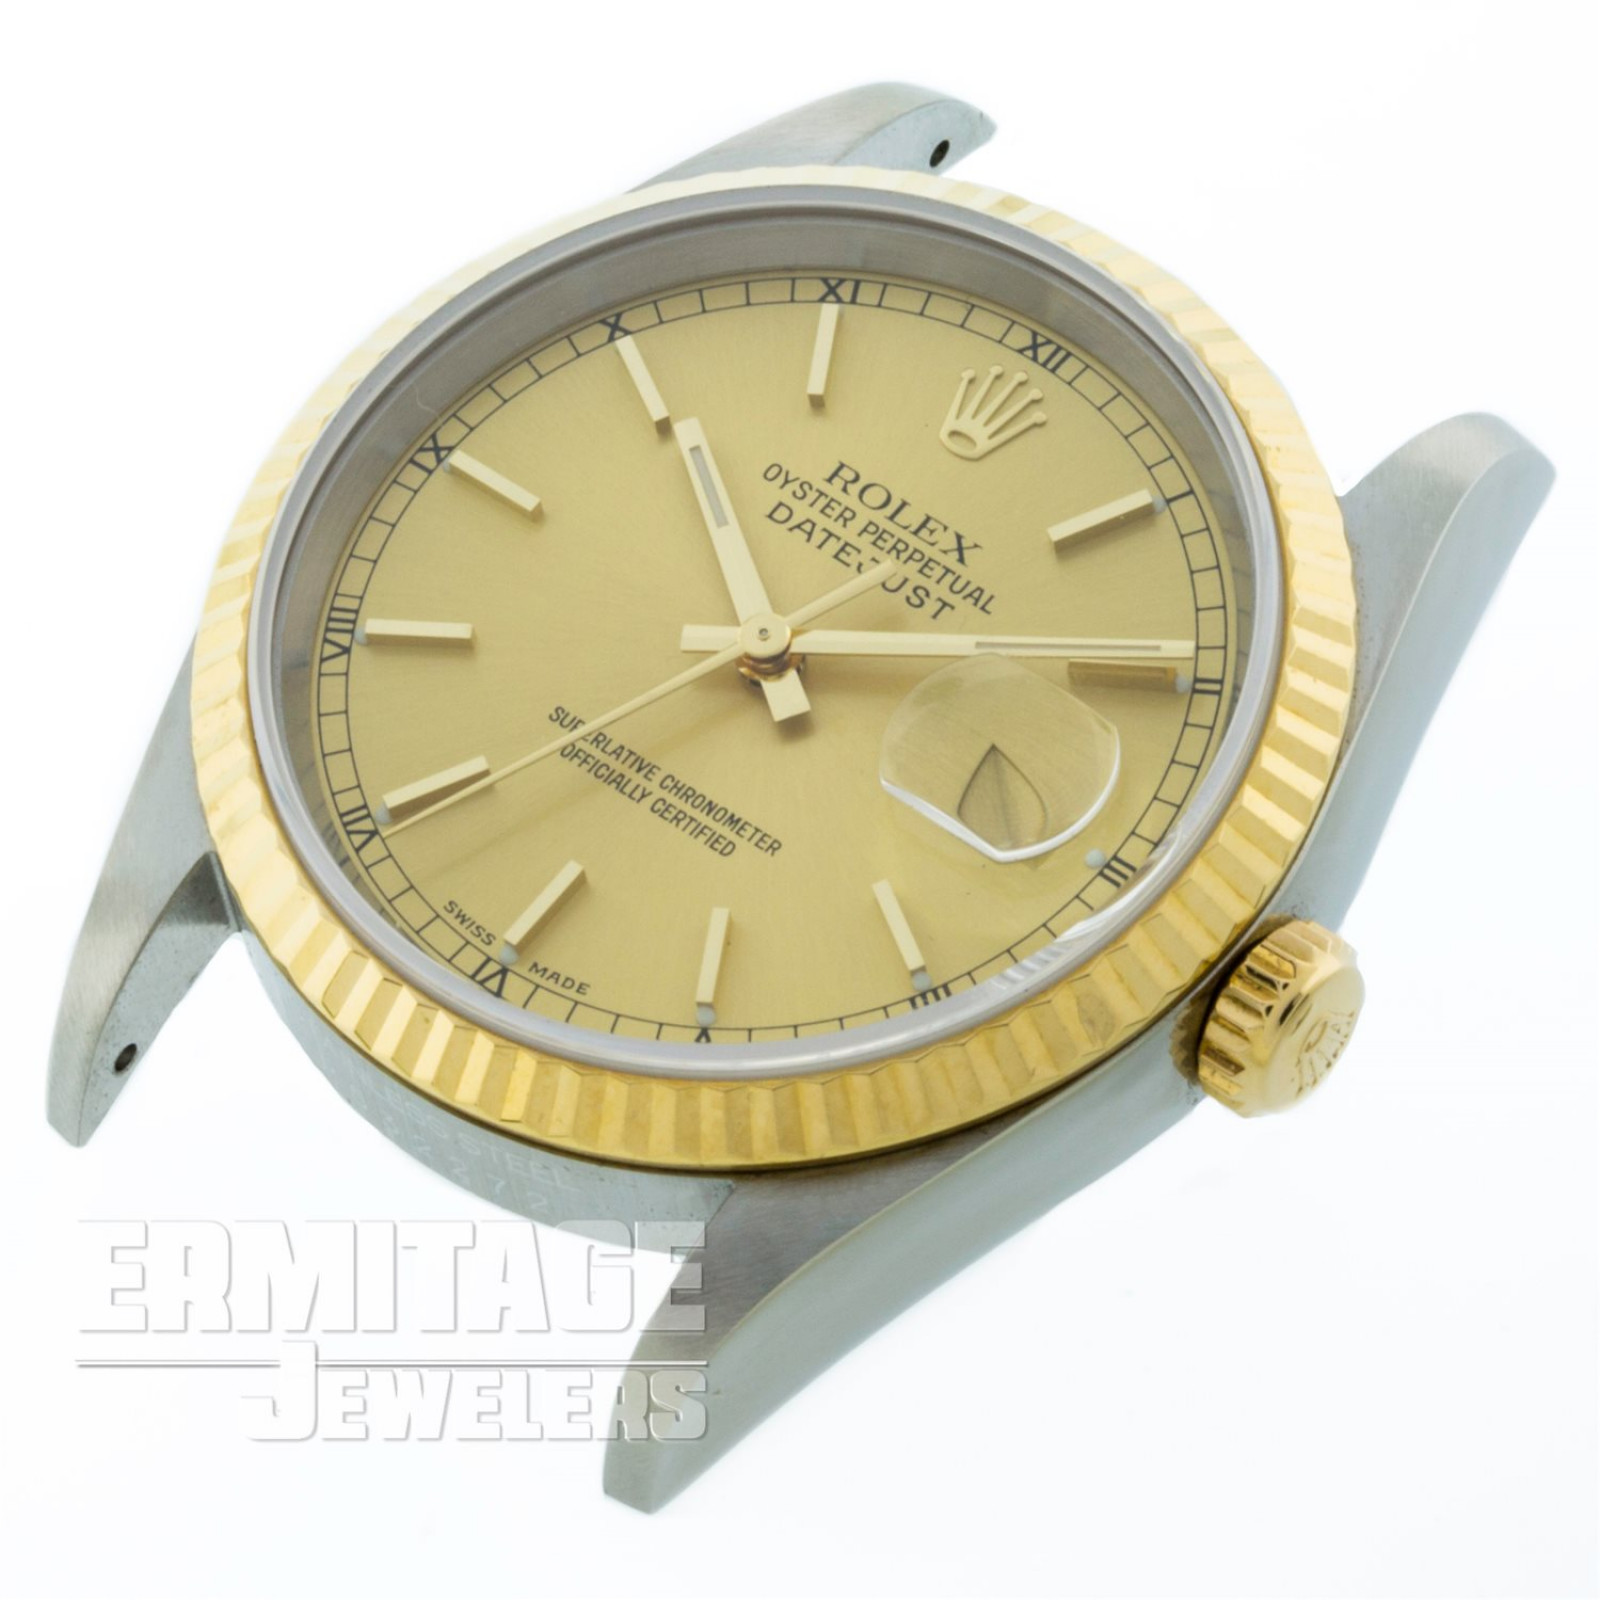 Rolex Datejust 16233 36 mm Champagne Dial